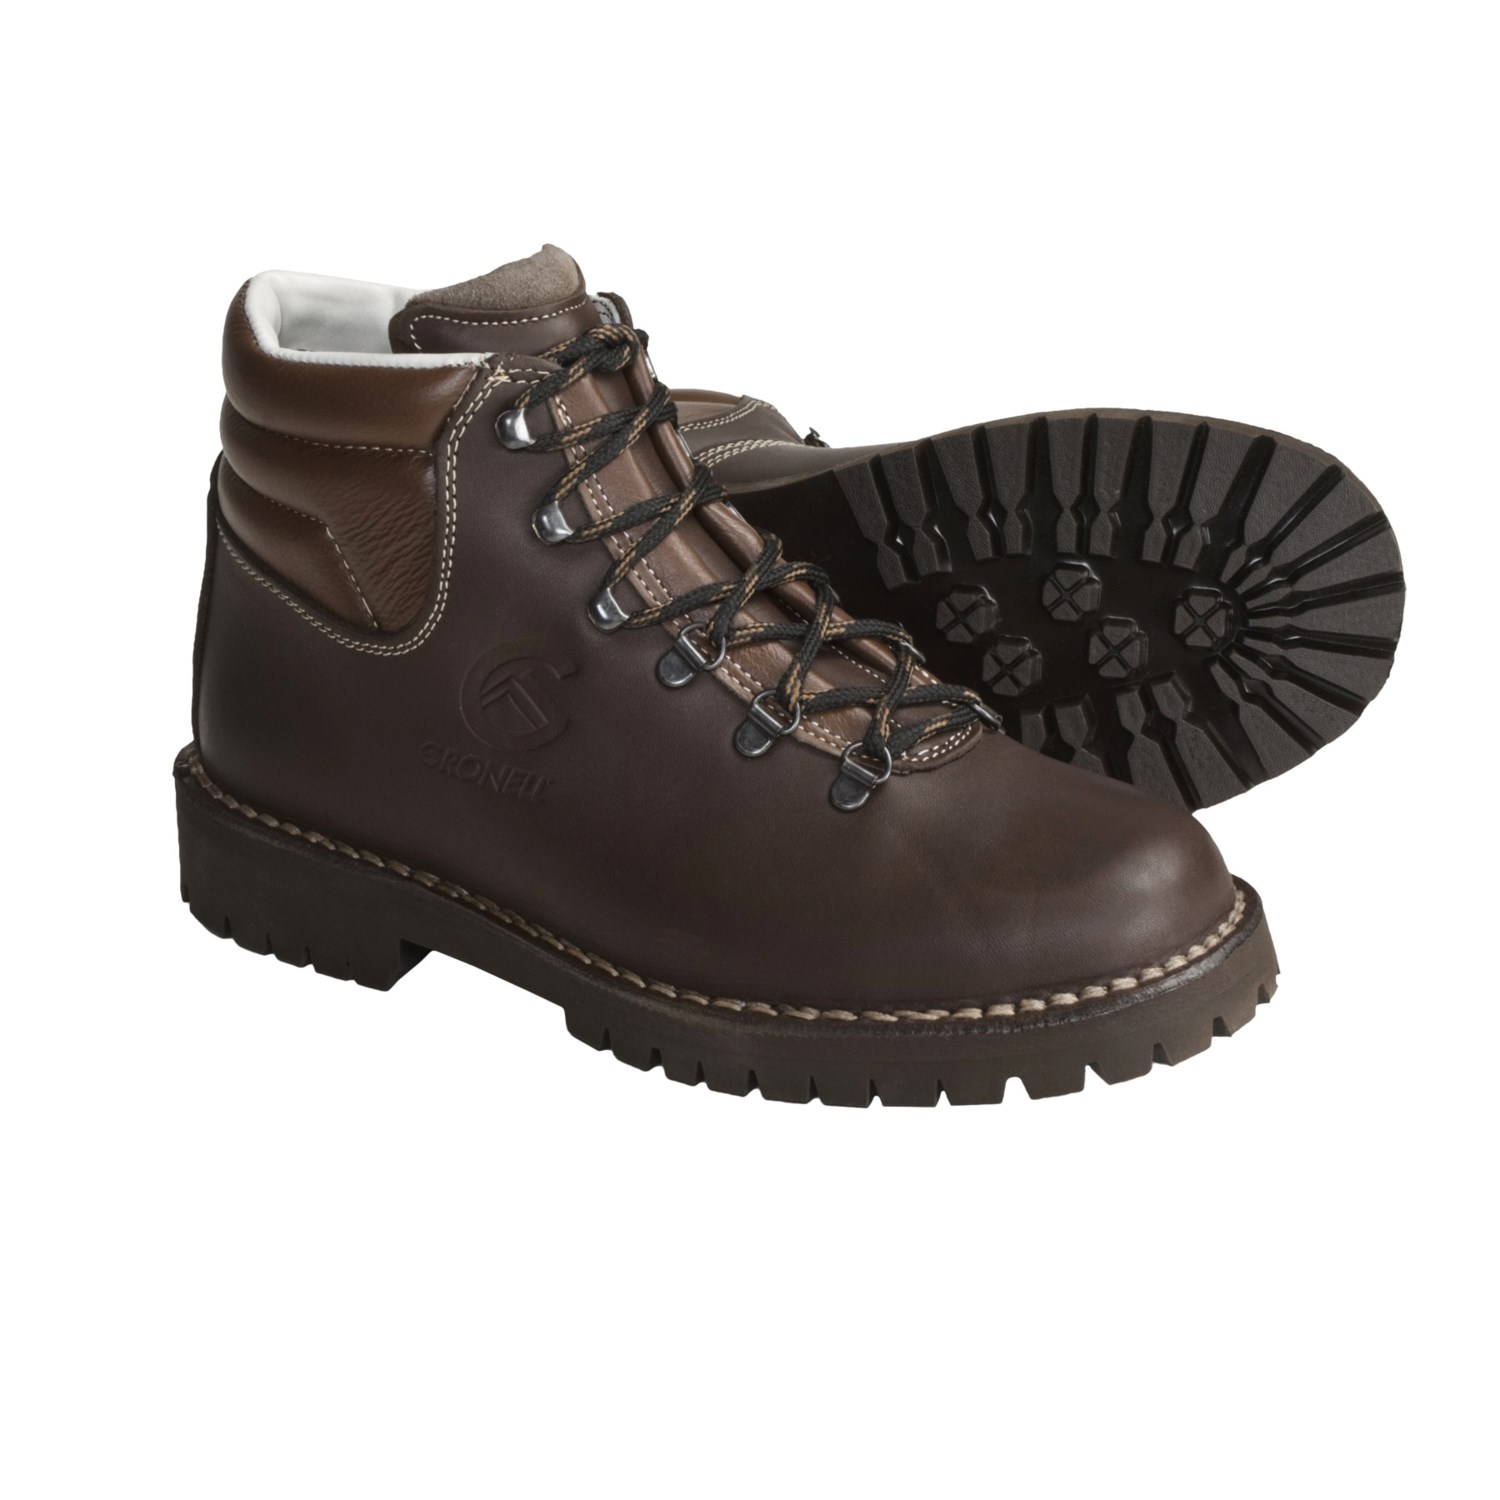 Gronell Scalorbi Hiking Boots (For Men) 3835F - Save 57%